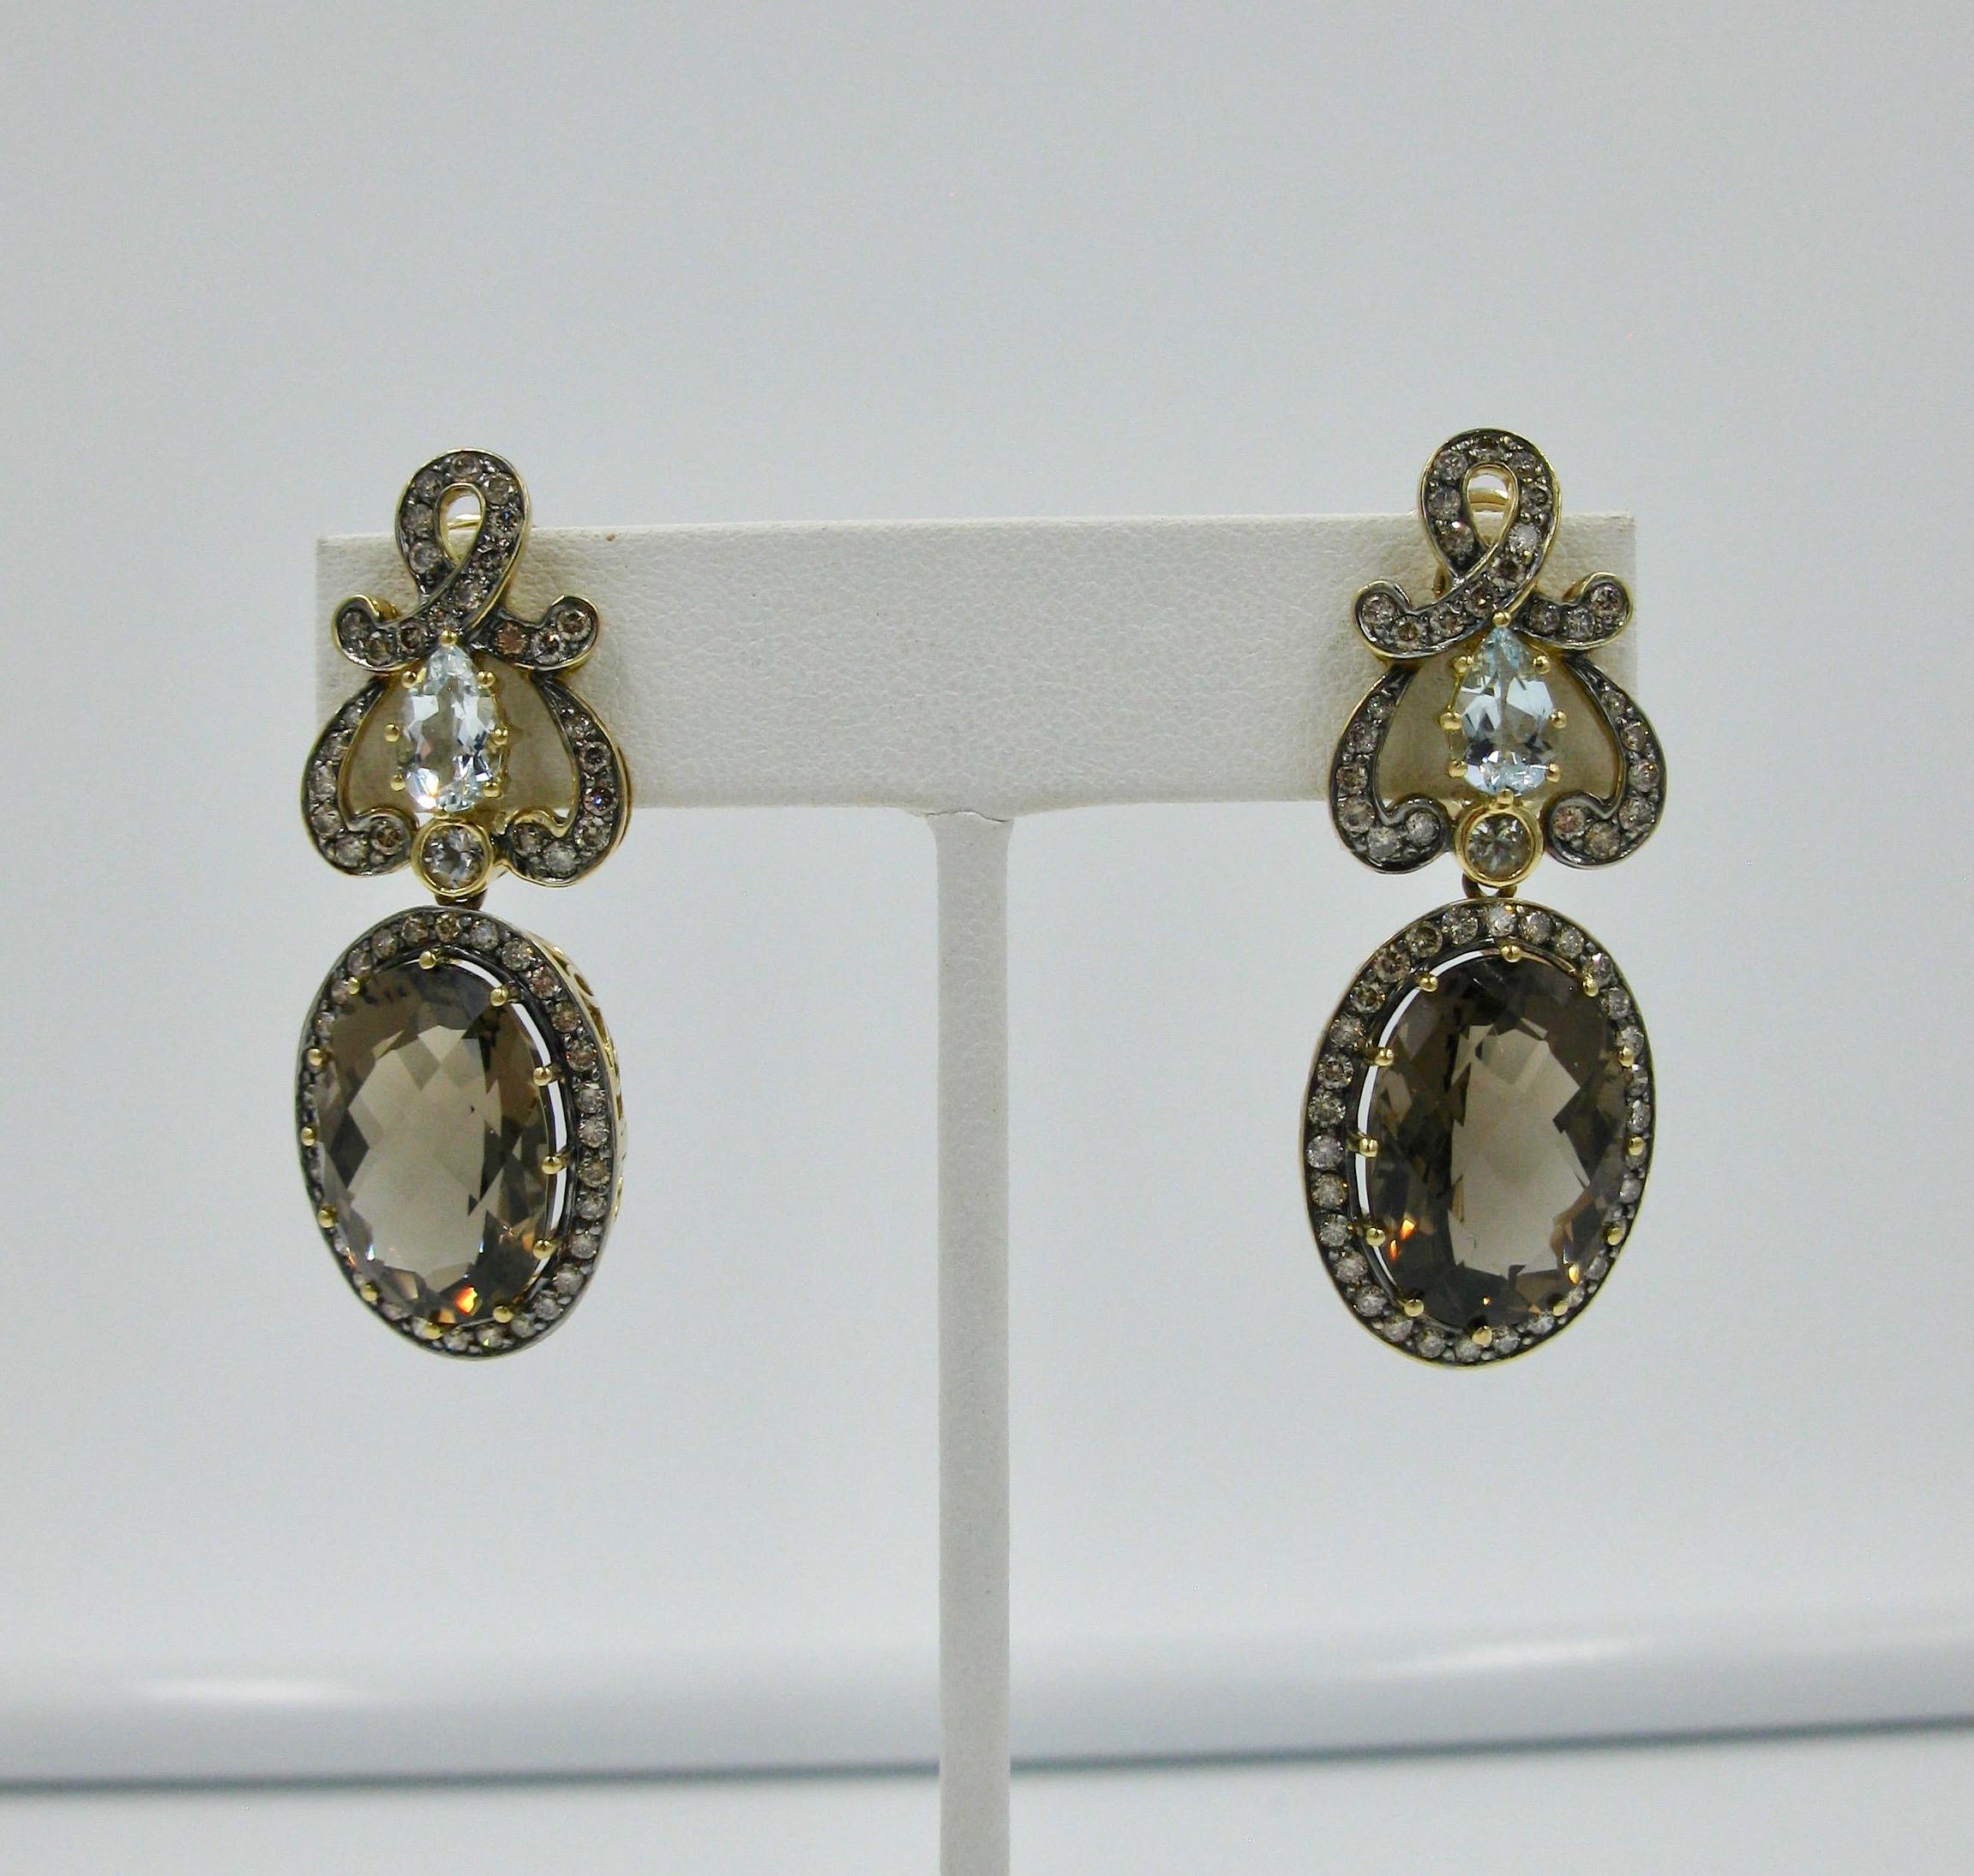 This is a stunning pair of two inch jeweled pendant earrings from the estate of legendary Hollywood writer Jackie Collins.  The earrings with fancy oval cut Smoky Quartz of 3/4 inches in length, with pear shaped Blue Topaz surmounts, and a gorgeous